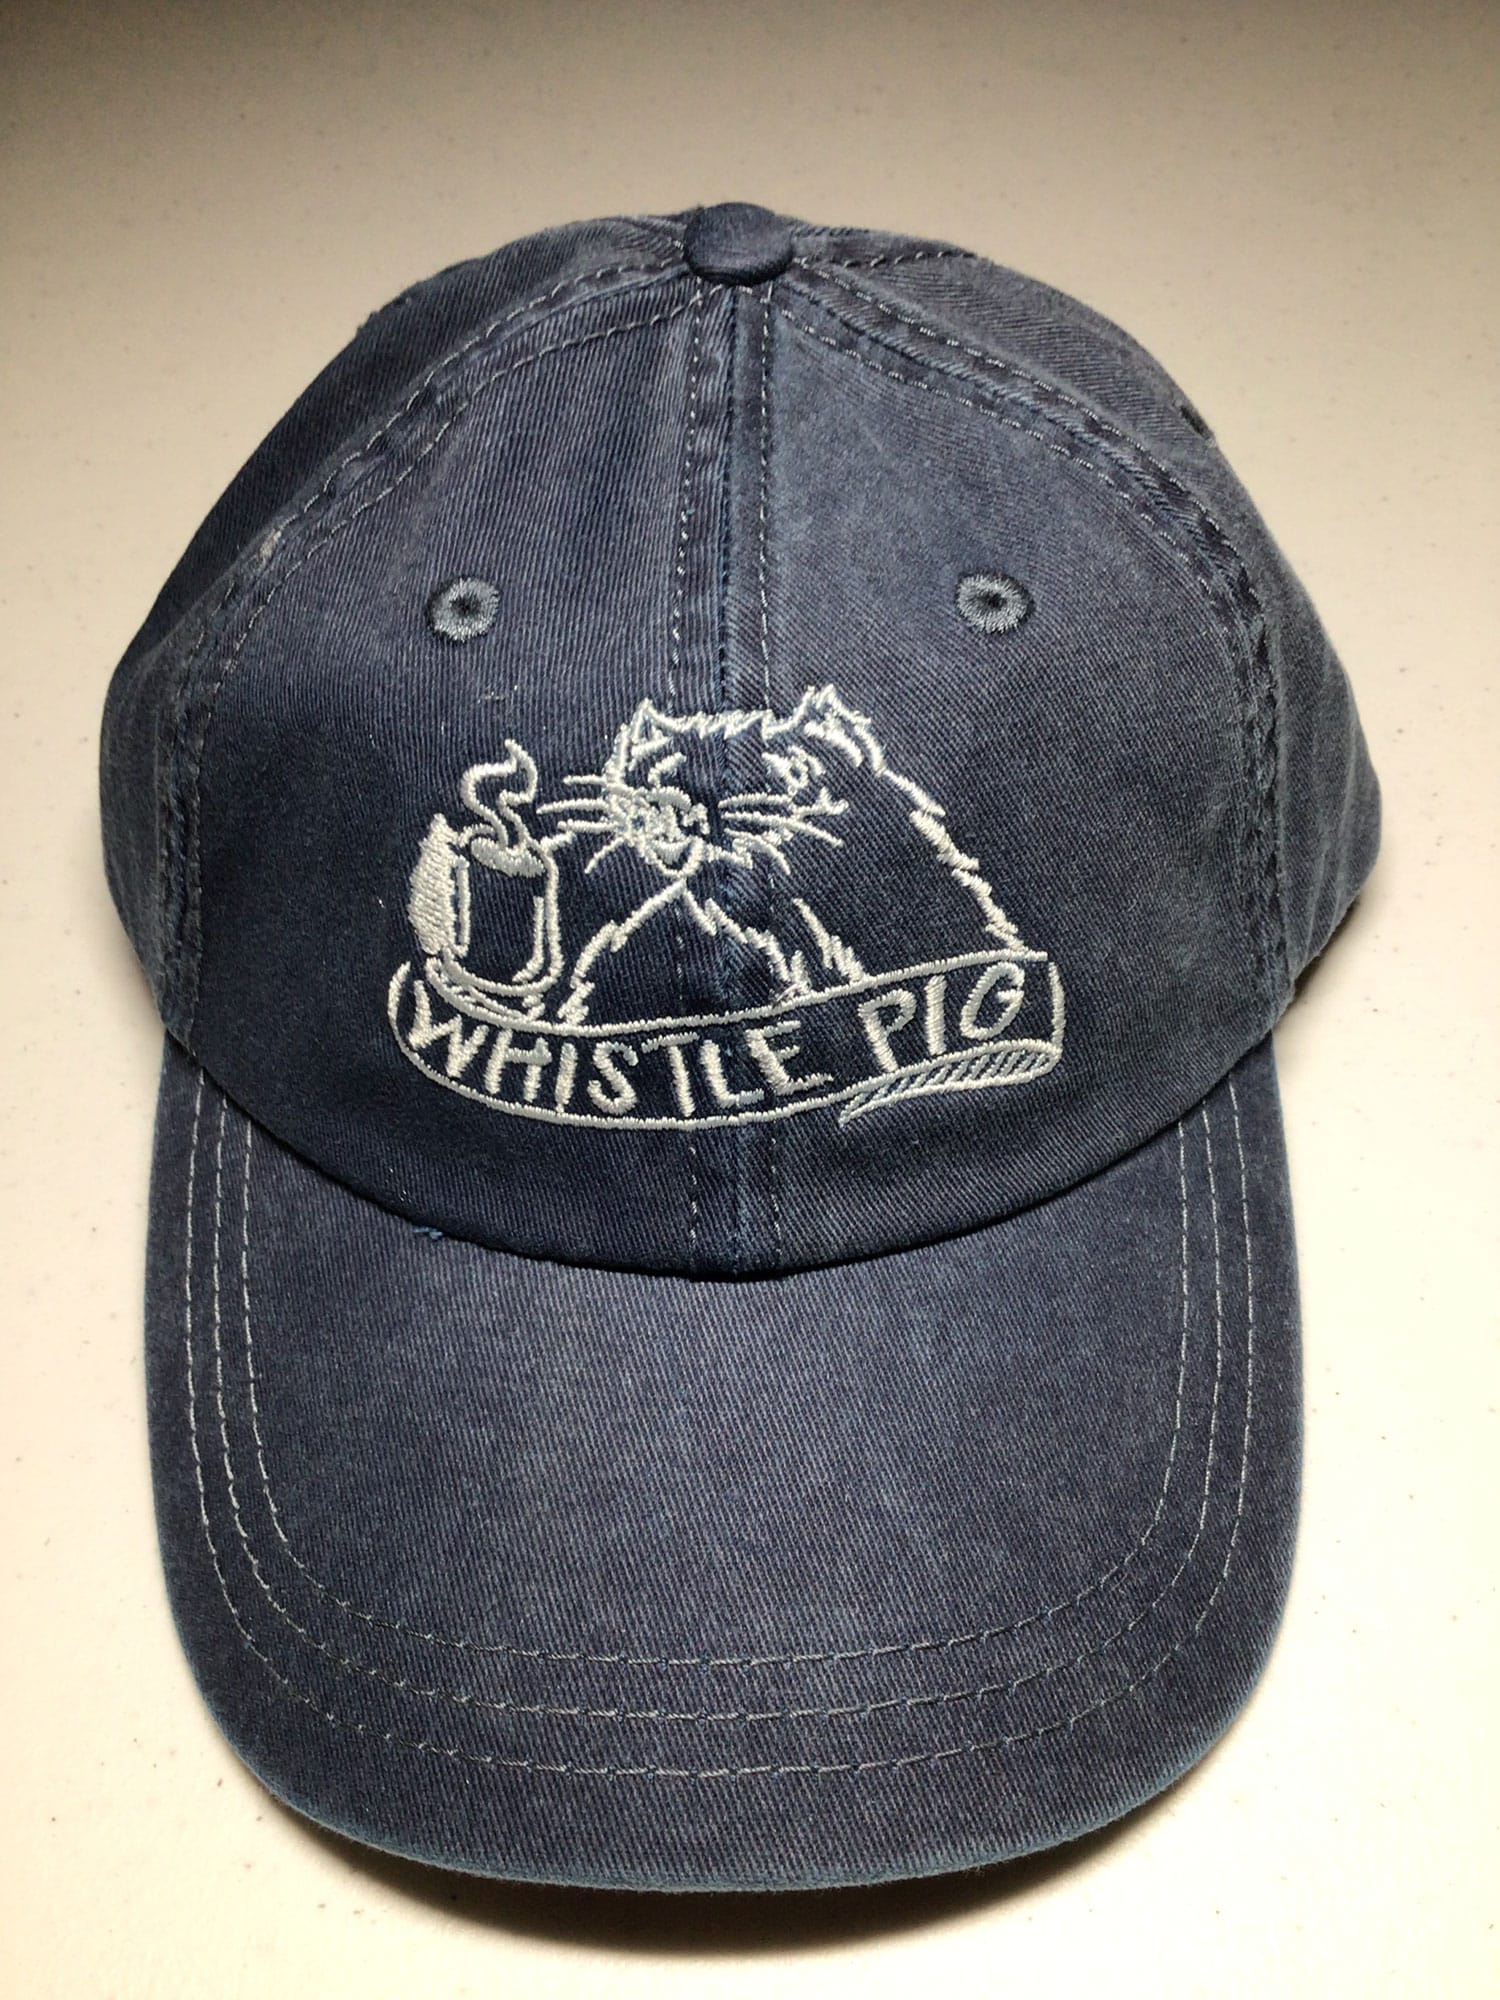 Black baseball cap with sewn Whistle Pig logo in white on the crown.